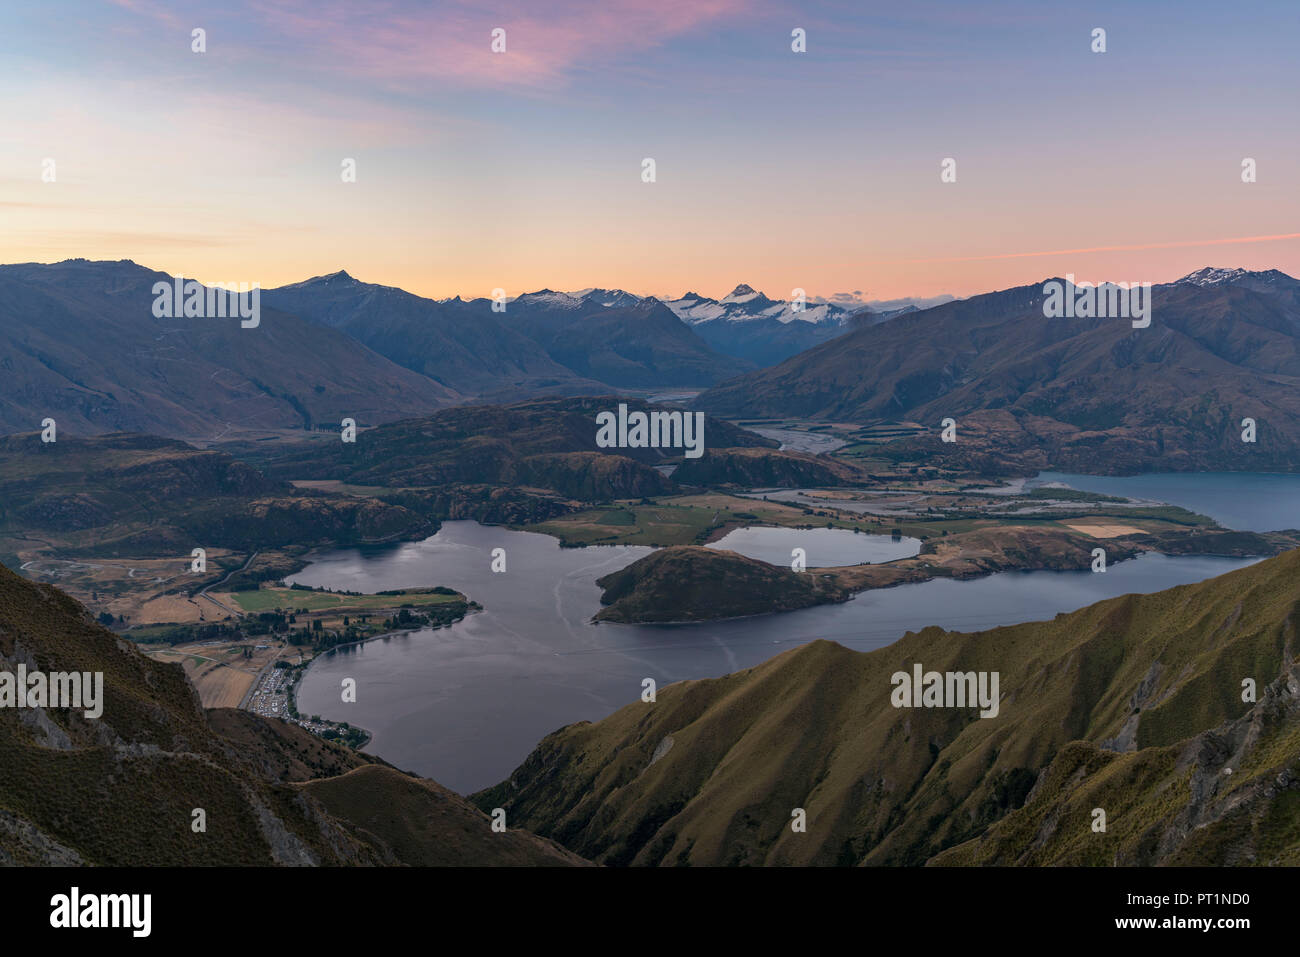 View of Glendhu Bay and Mt aspiring NP from Roys Peak lookout at sunset, Wanaka, Queenstown Lakes district, Otago region, South Island, New Zealand, Stock Photo